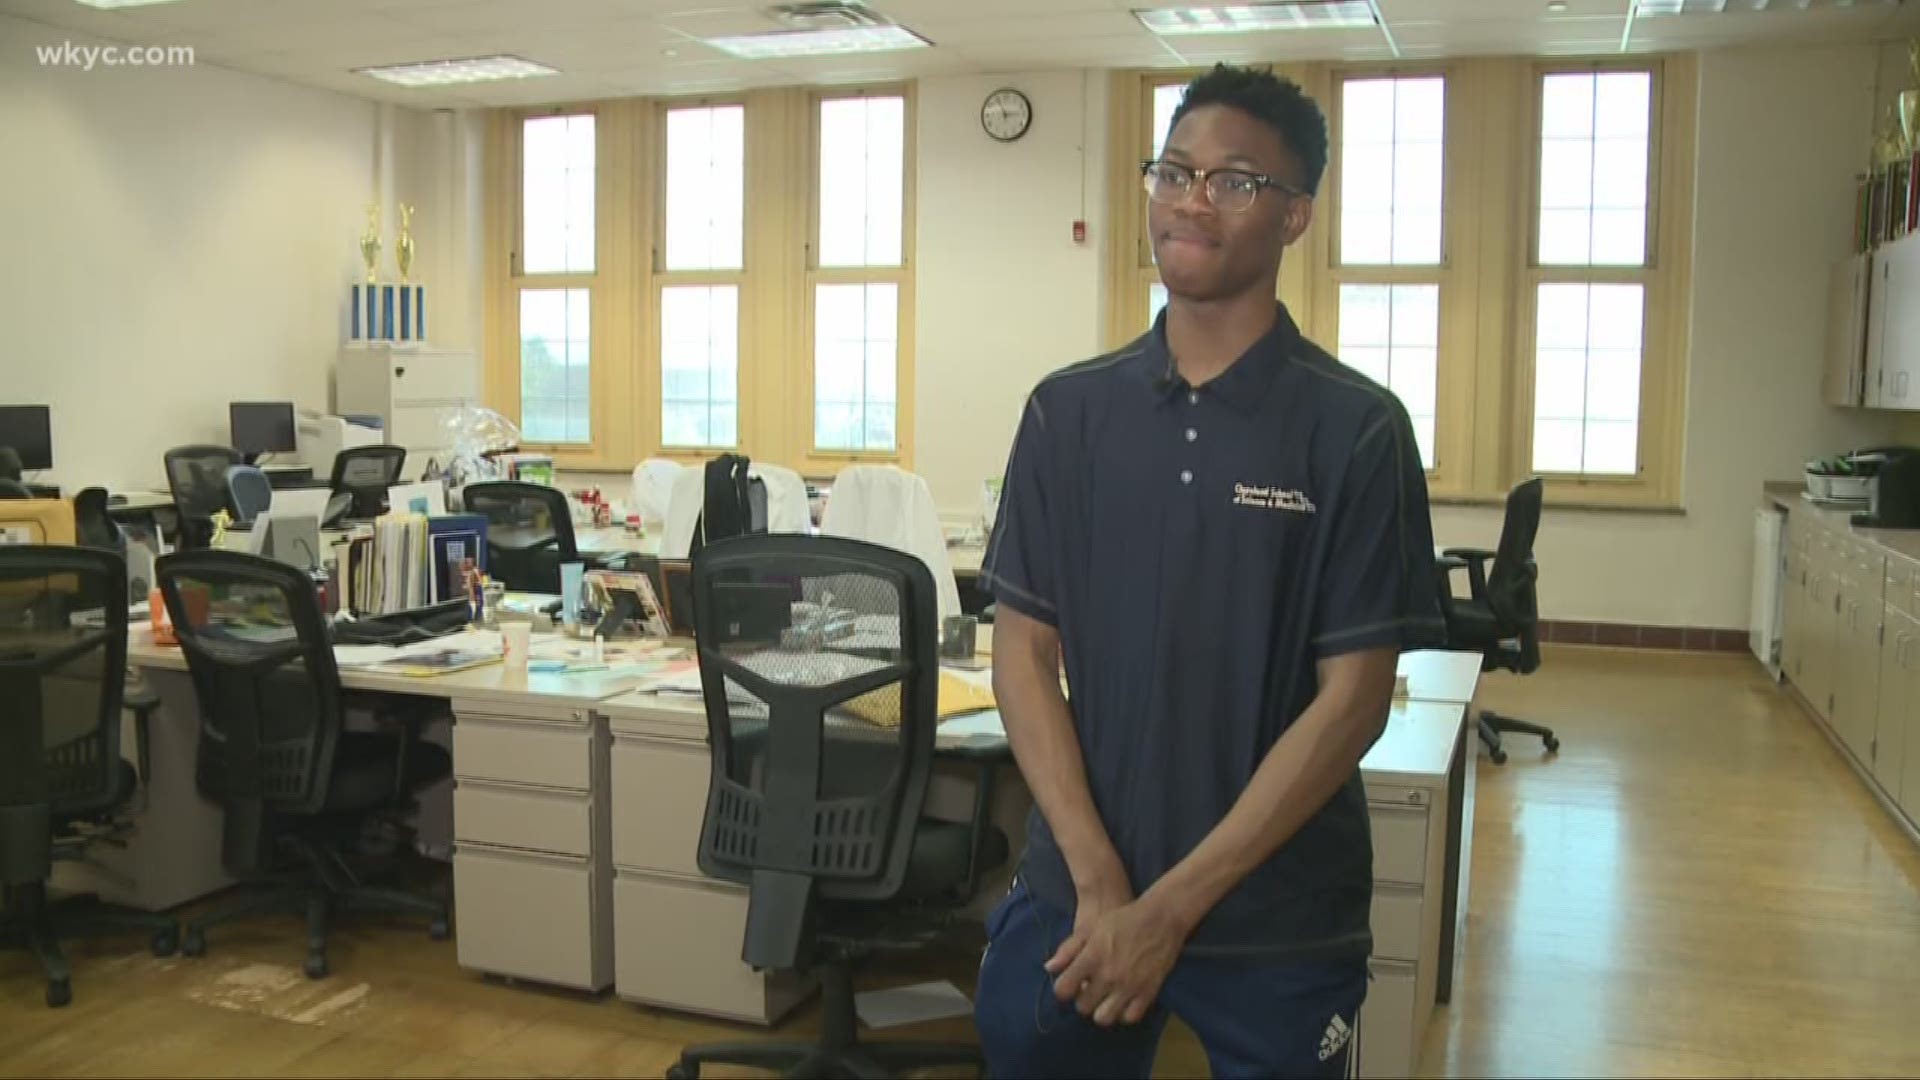 Cleveland student beats odds, goes to Harvard